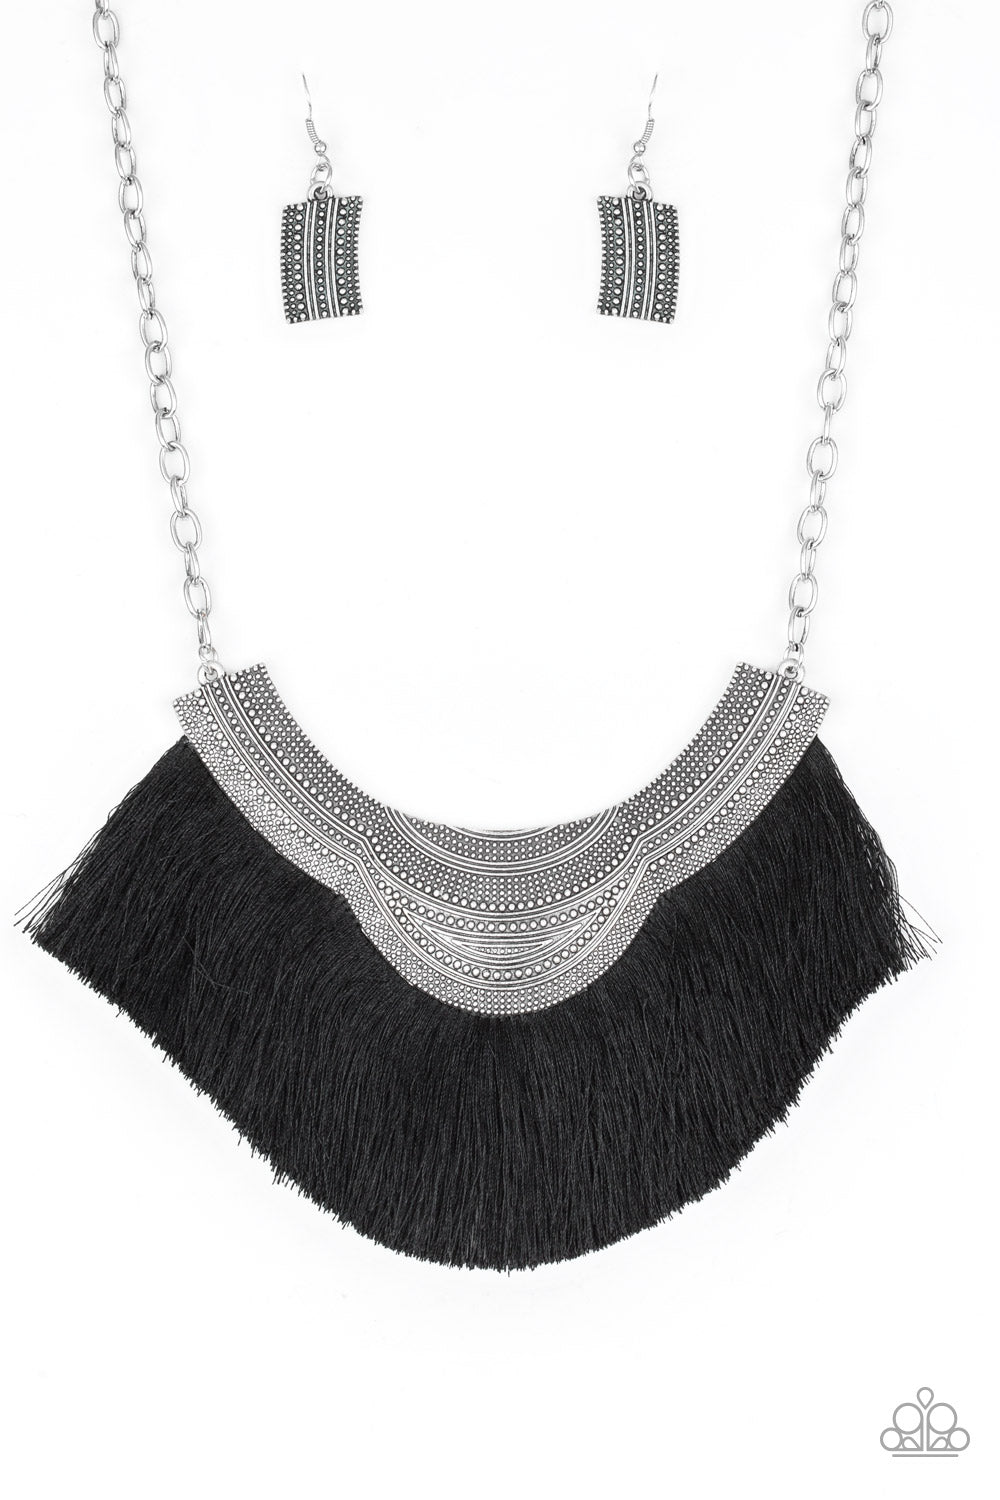 Paparazzi Accessories My PHARAOH Lady Black Necklaces - Lady T Accessories